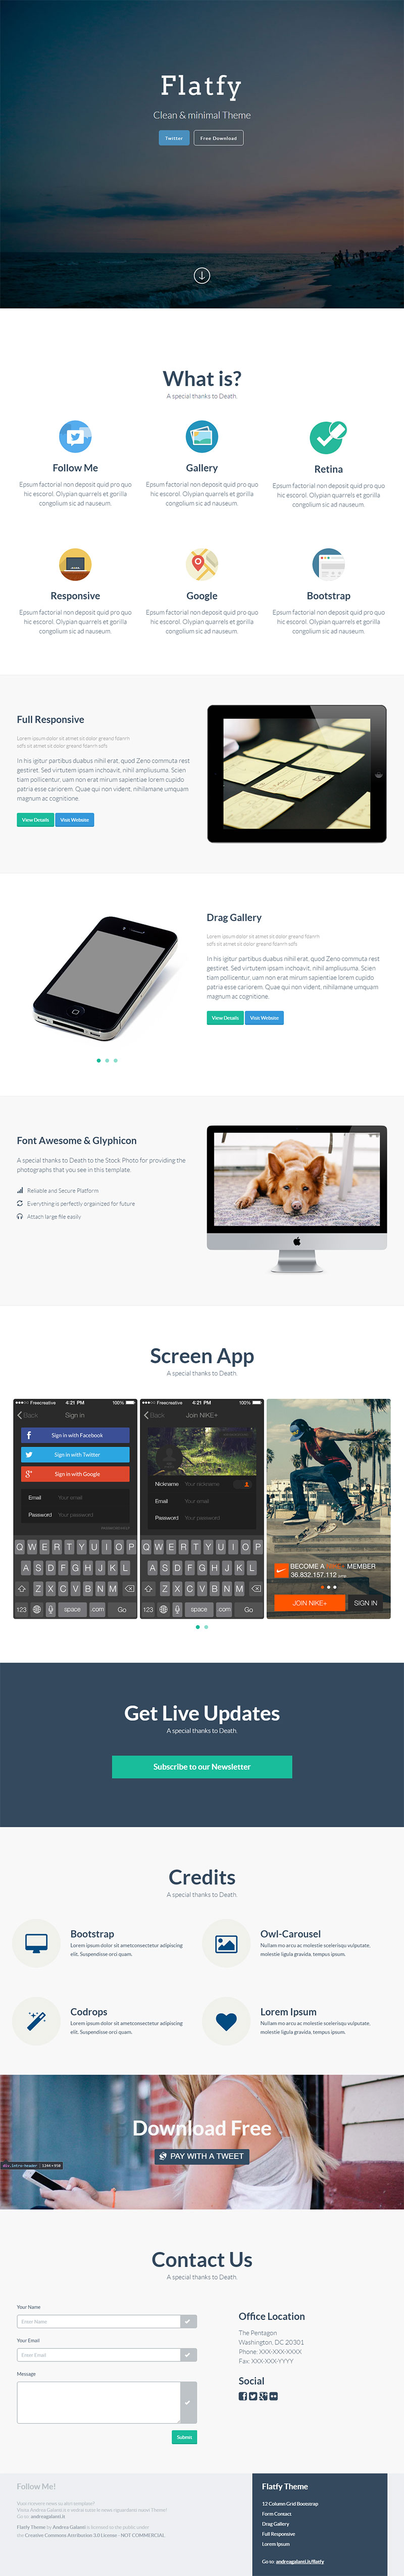 flatfy-free-flat-and-responsive-html5-template